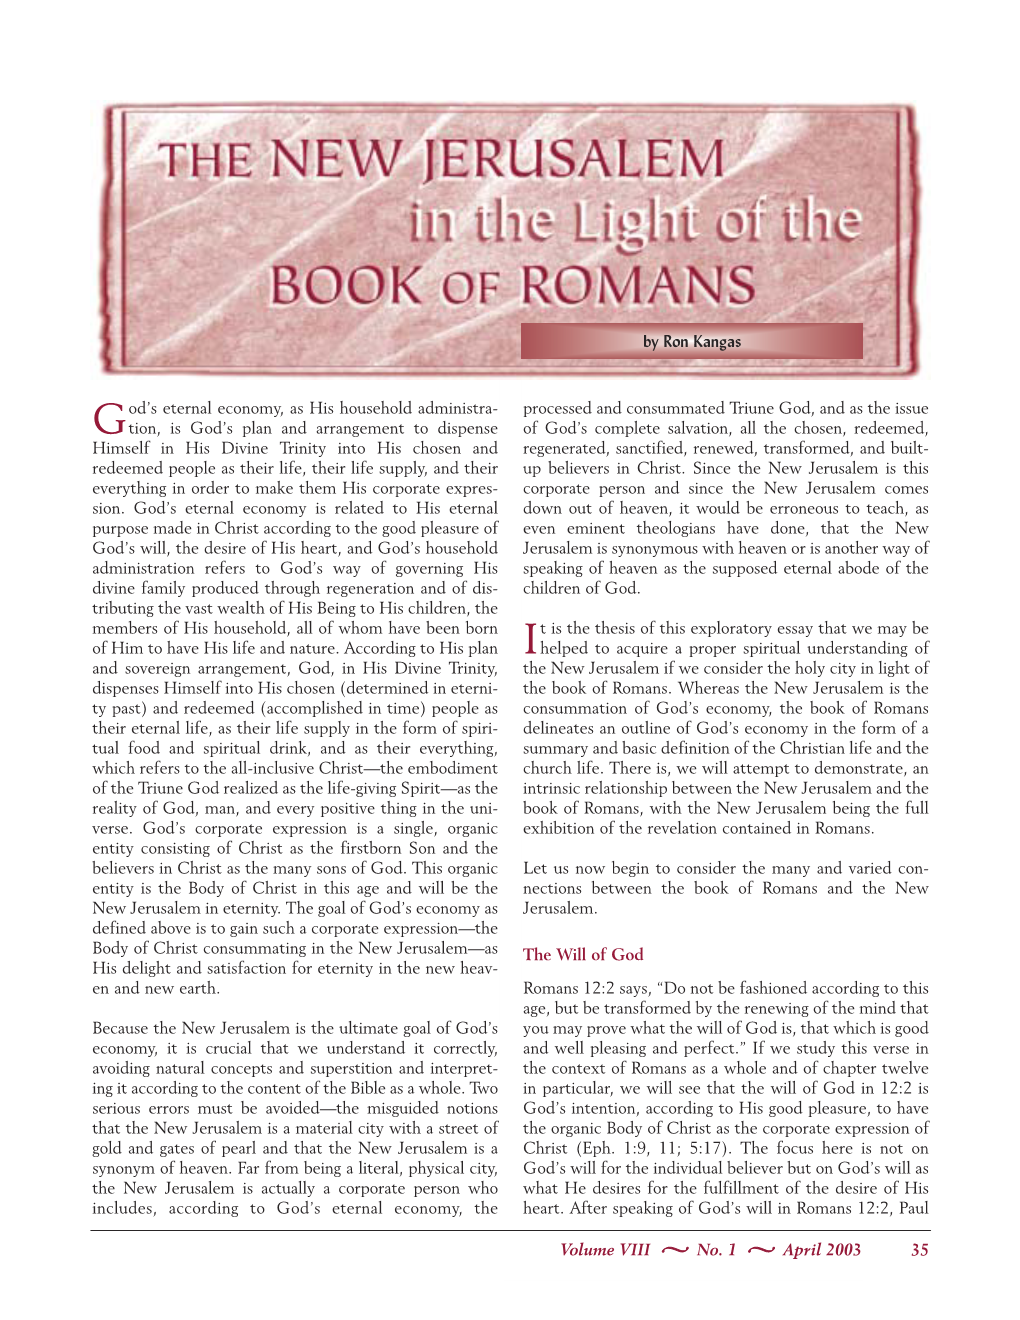 The New Jerusalem in Light of the Book of Romans